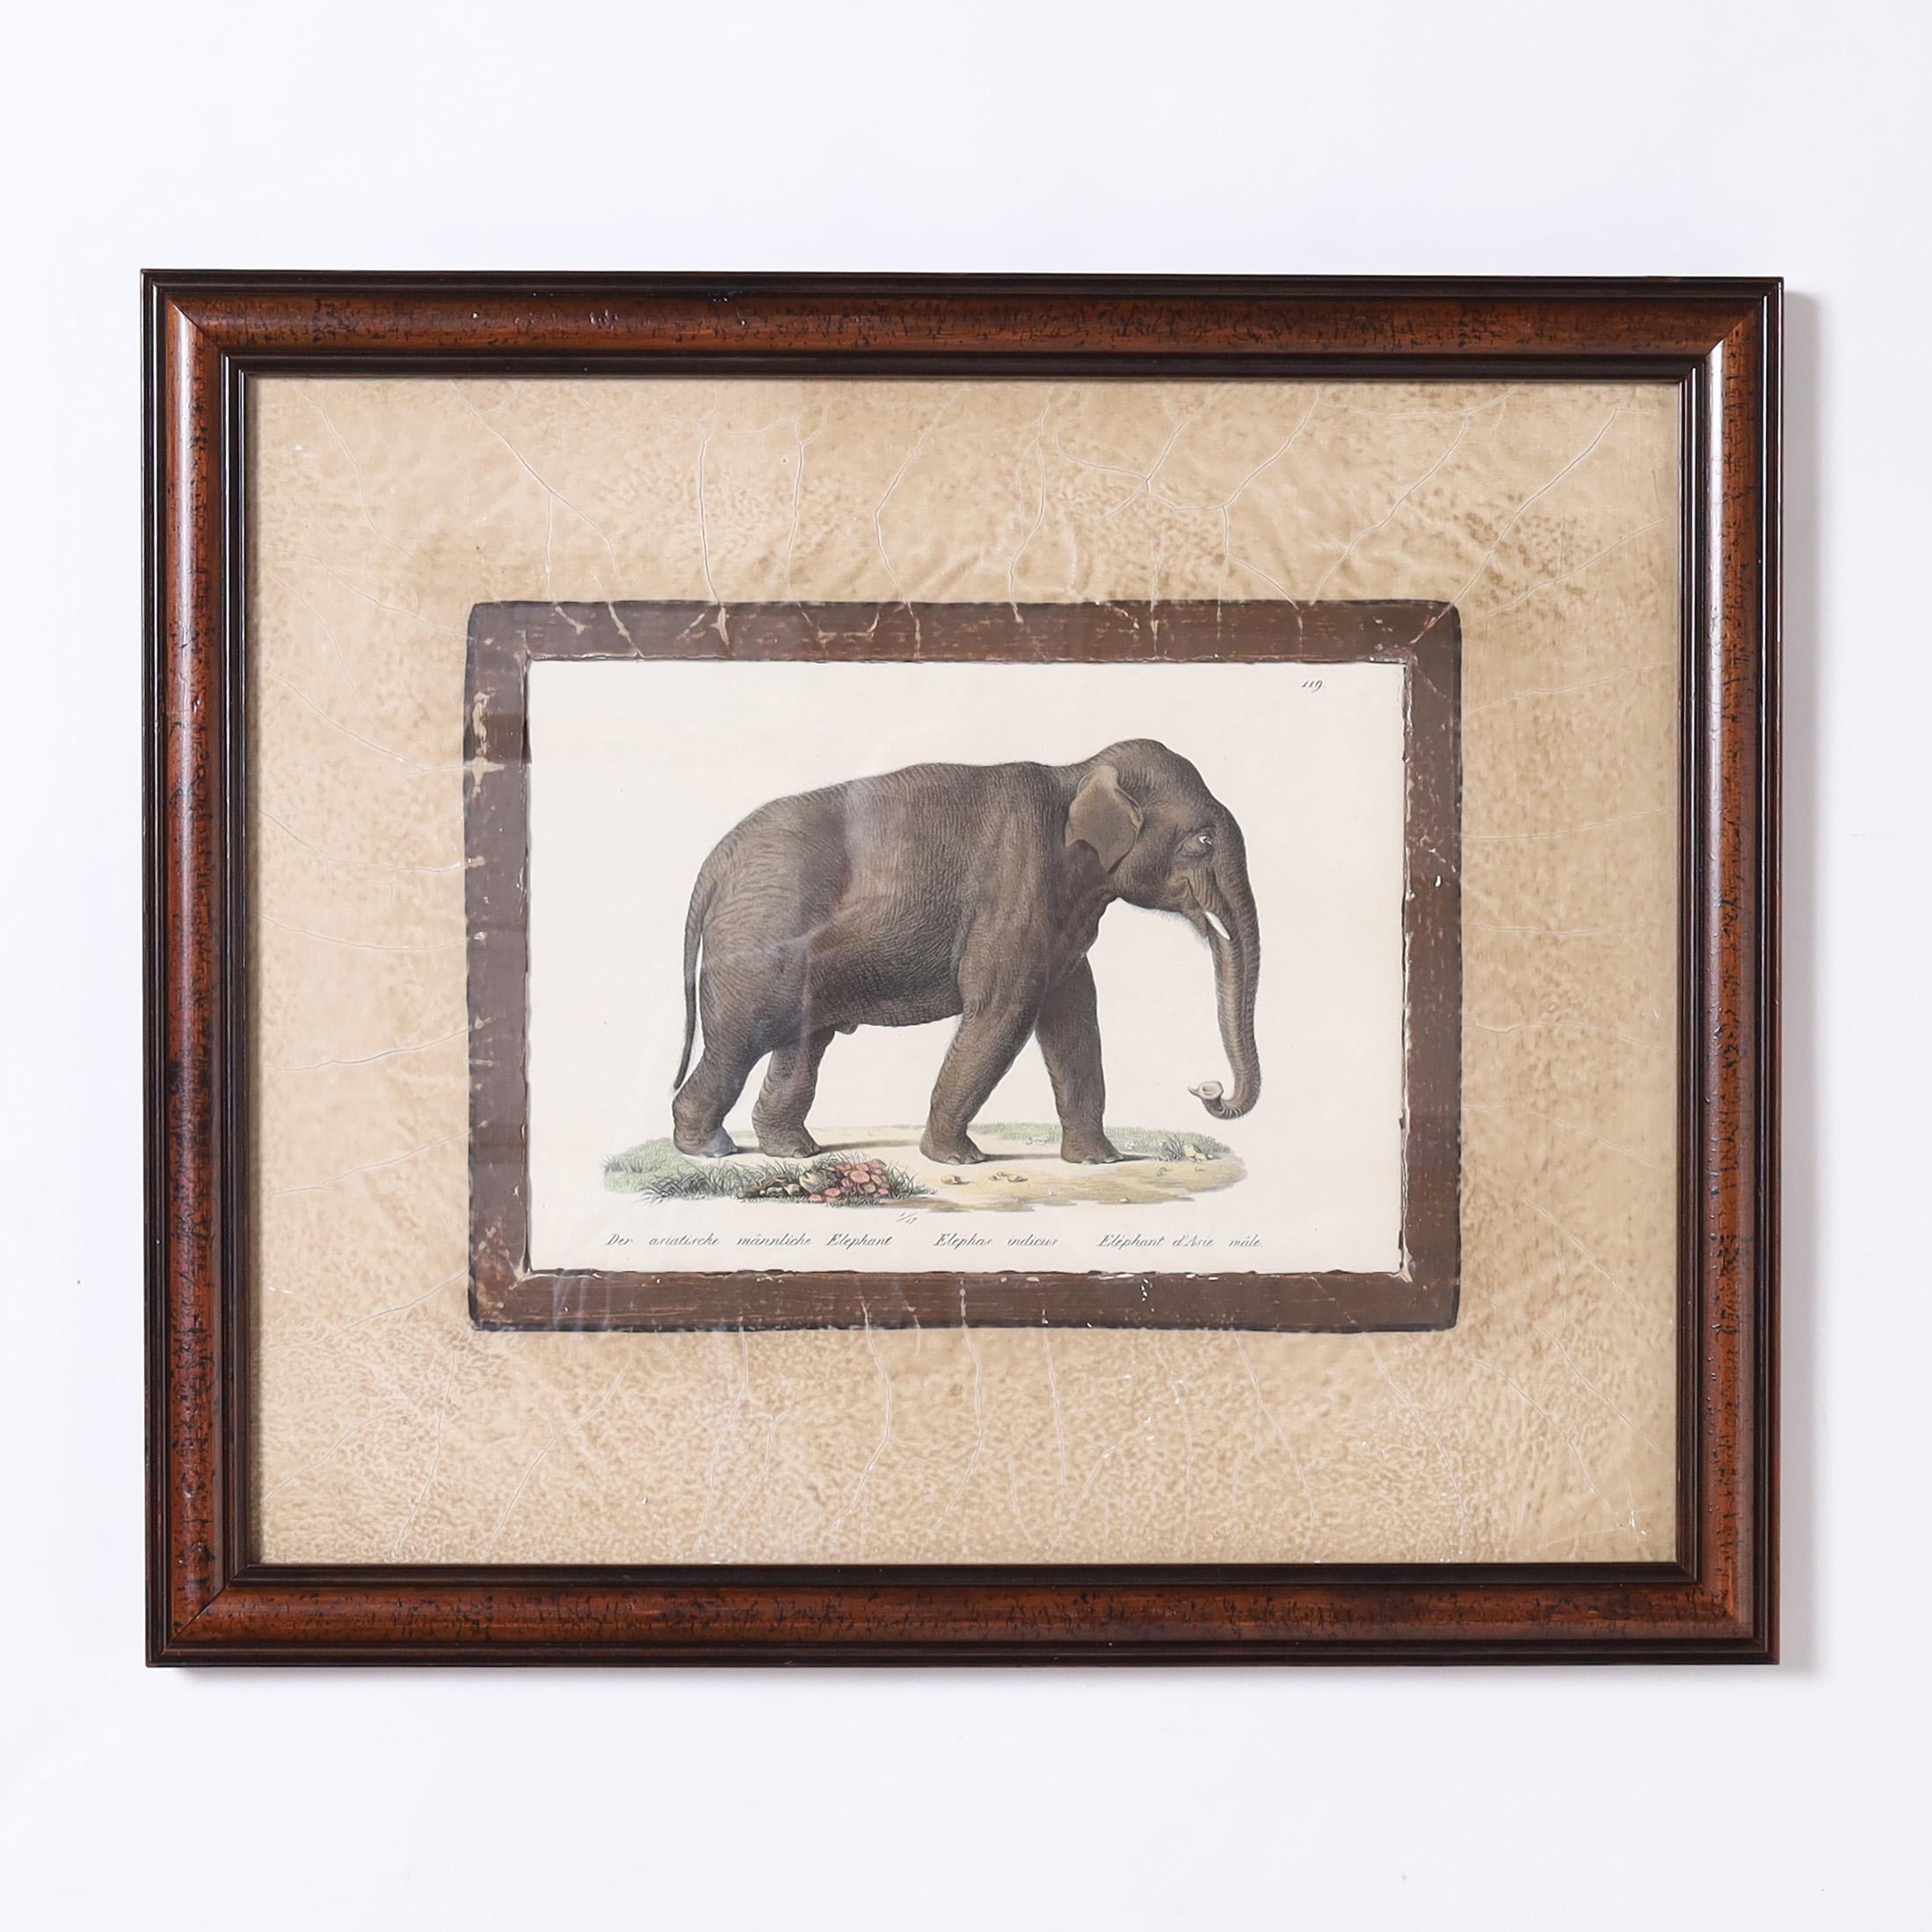 Intriguing set of four 19th century hand colored stone lithographs depicting animal species by the prolific Swiss artist and print maker Karl Joseph Brodtmann. Presented under glass in mahogany frames. 